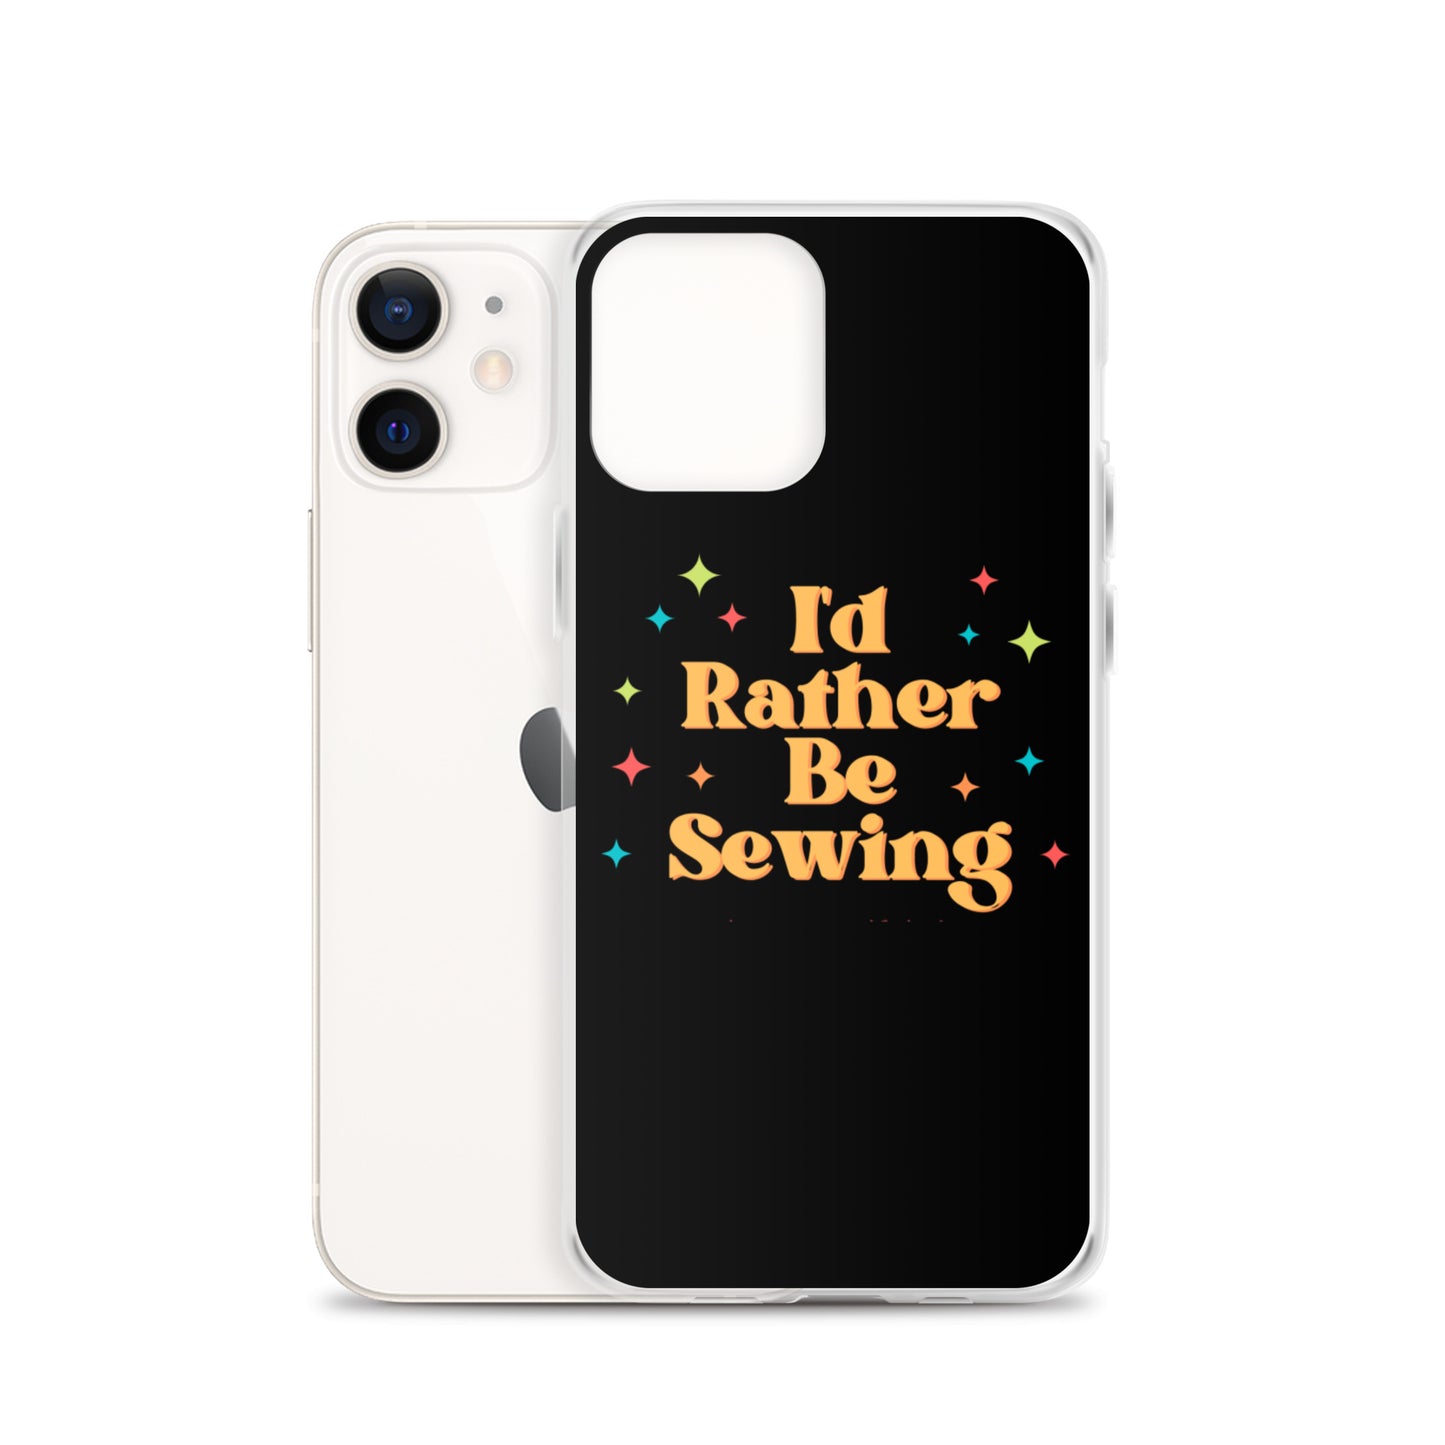 Rather Be Sewing Retro iPhone Case